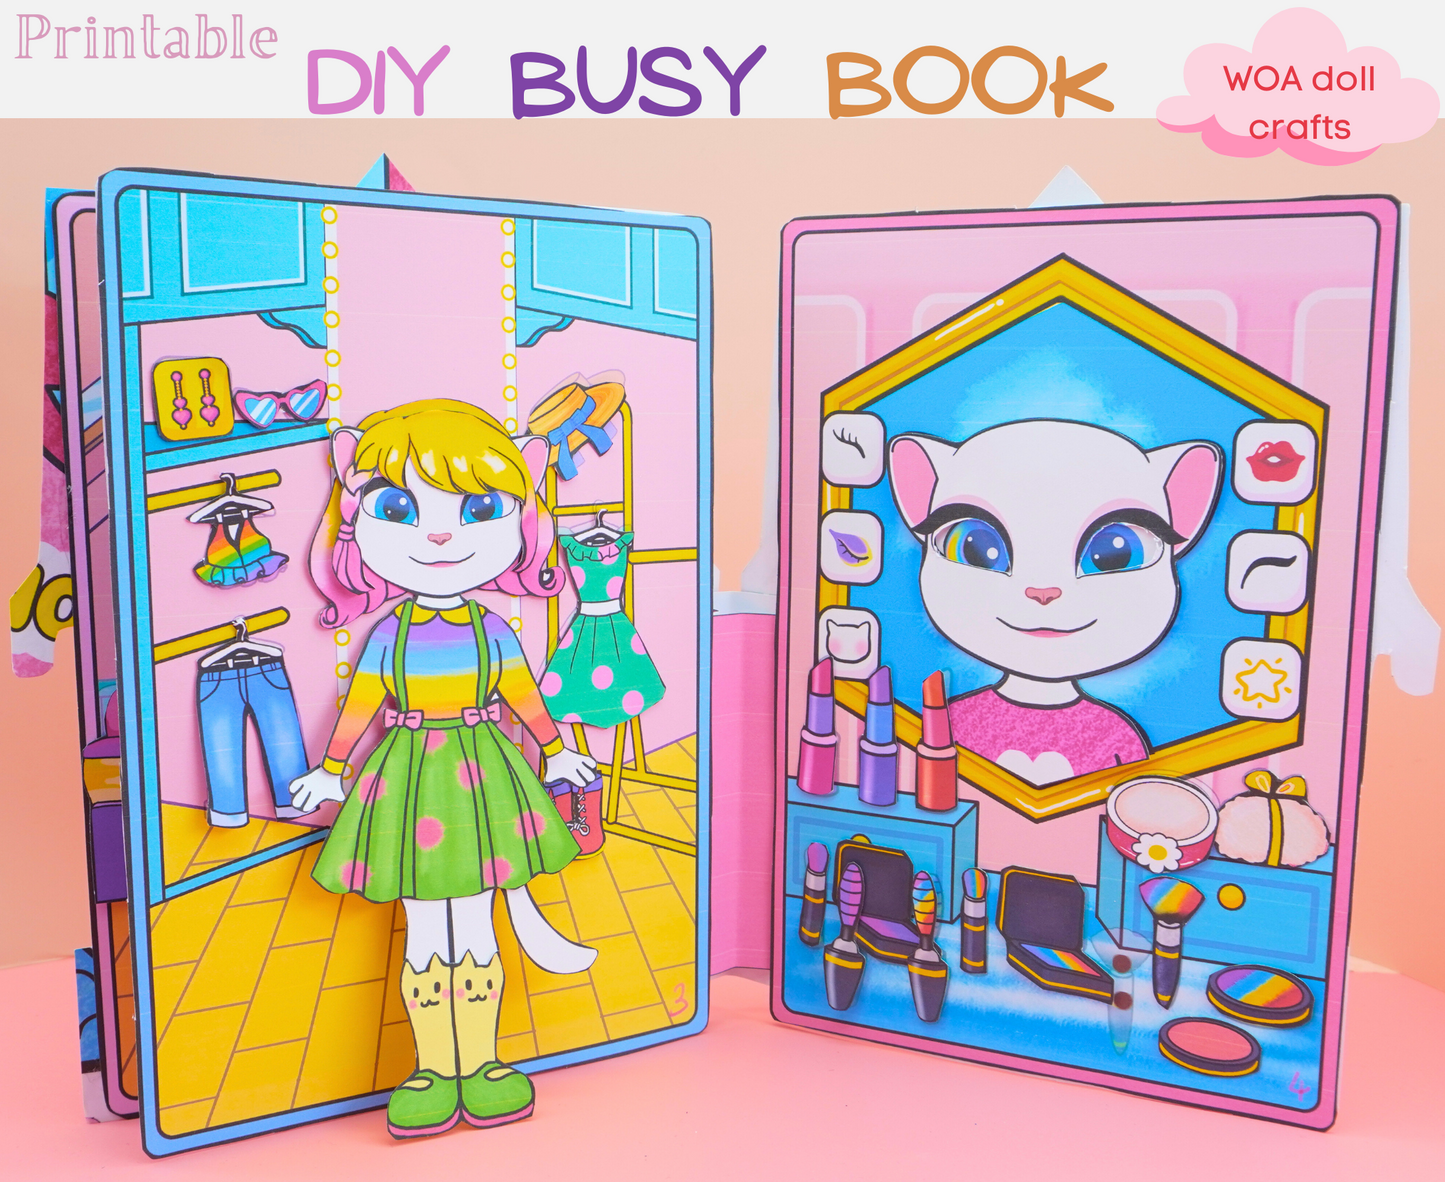 Angela’s house printables 🏠 DIY kit for your little one - Paper doll house - Activity book for kids 🏠 Woa Doll Crafts